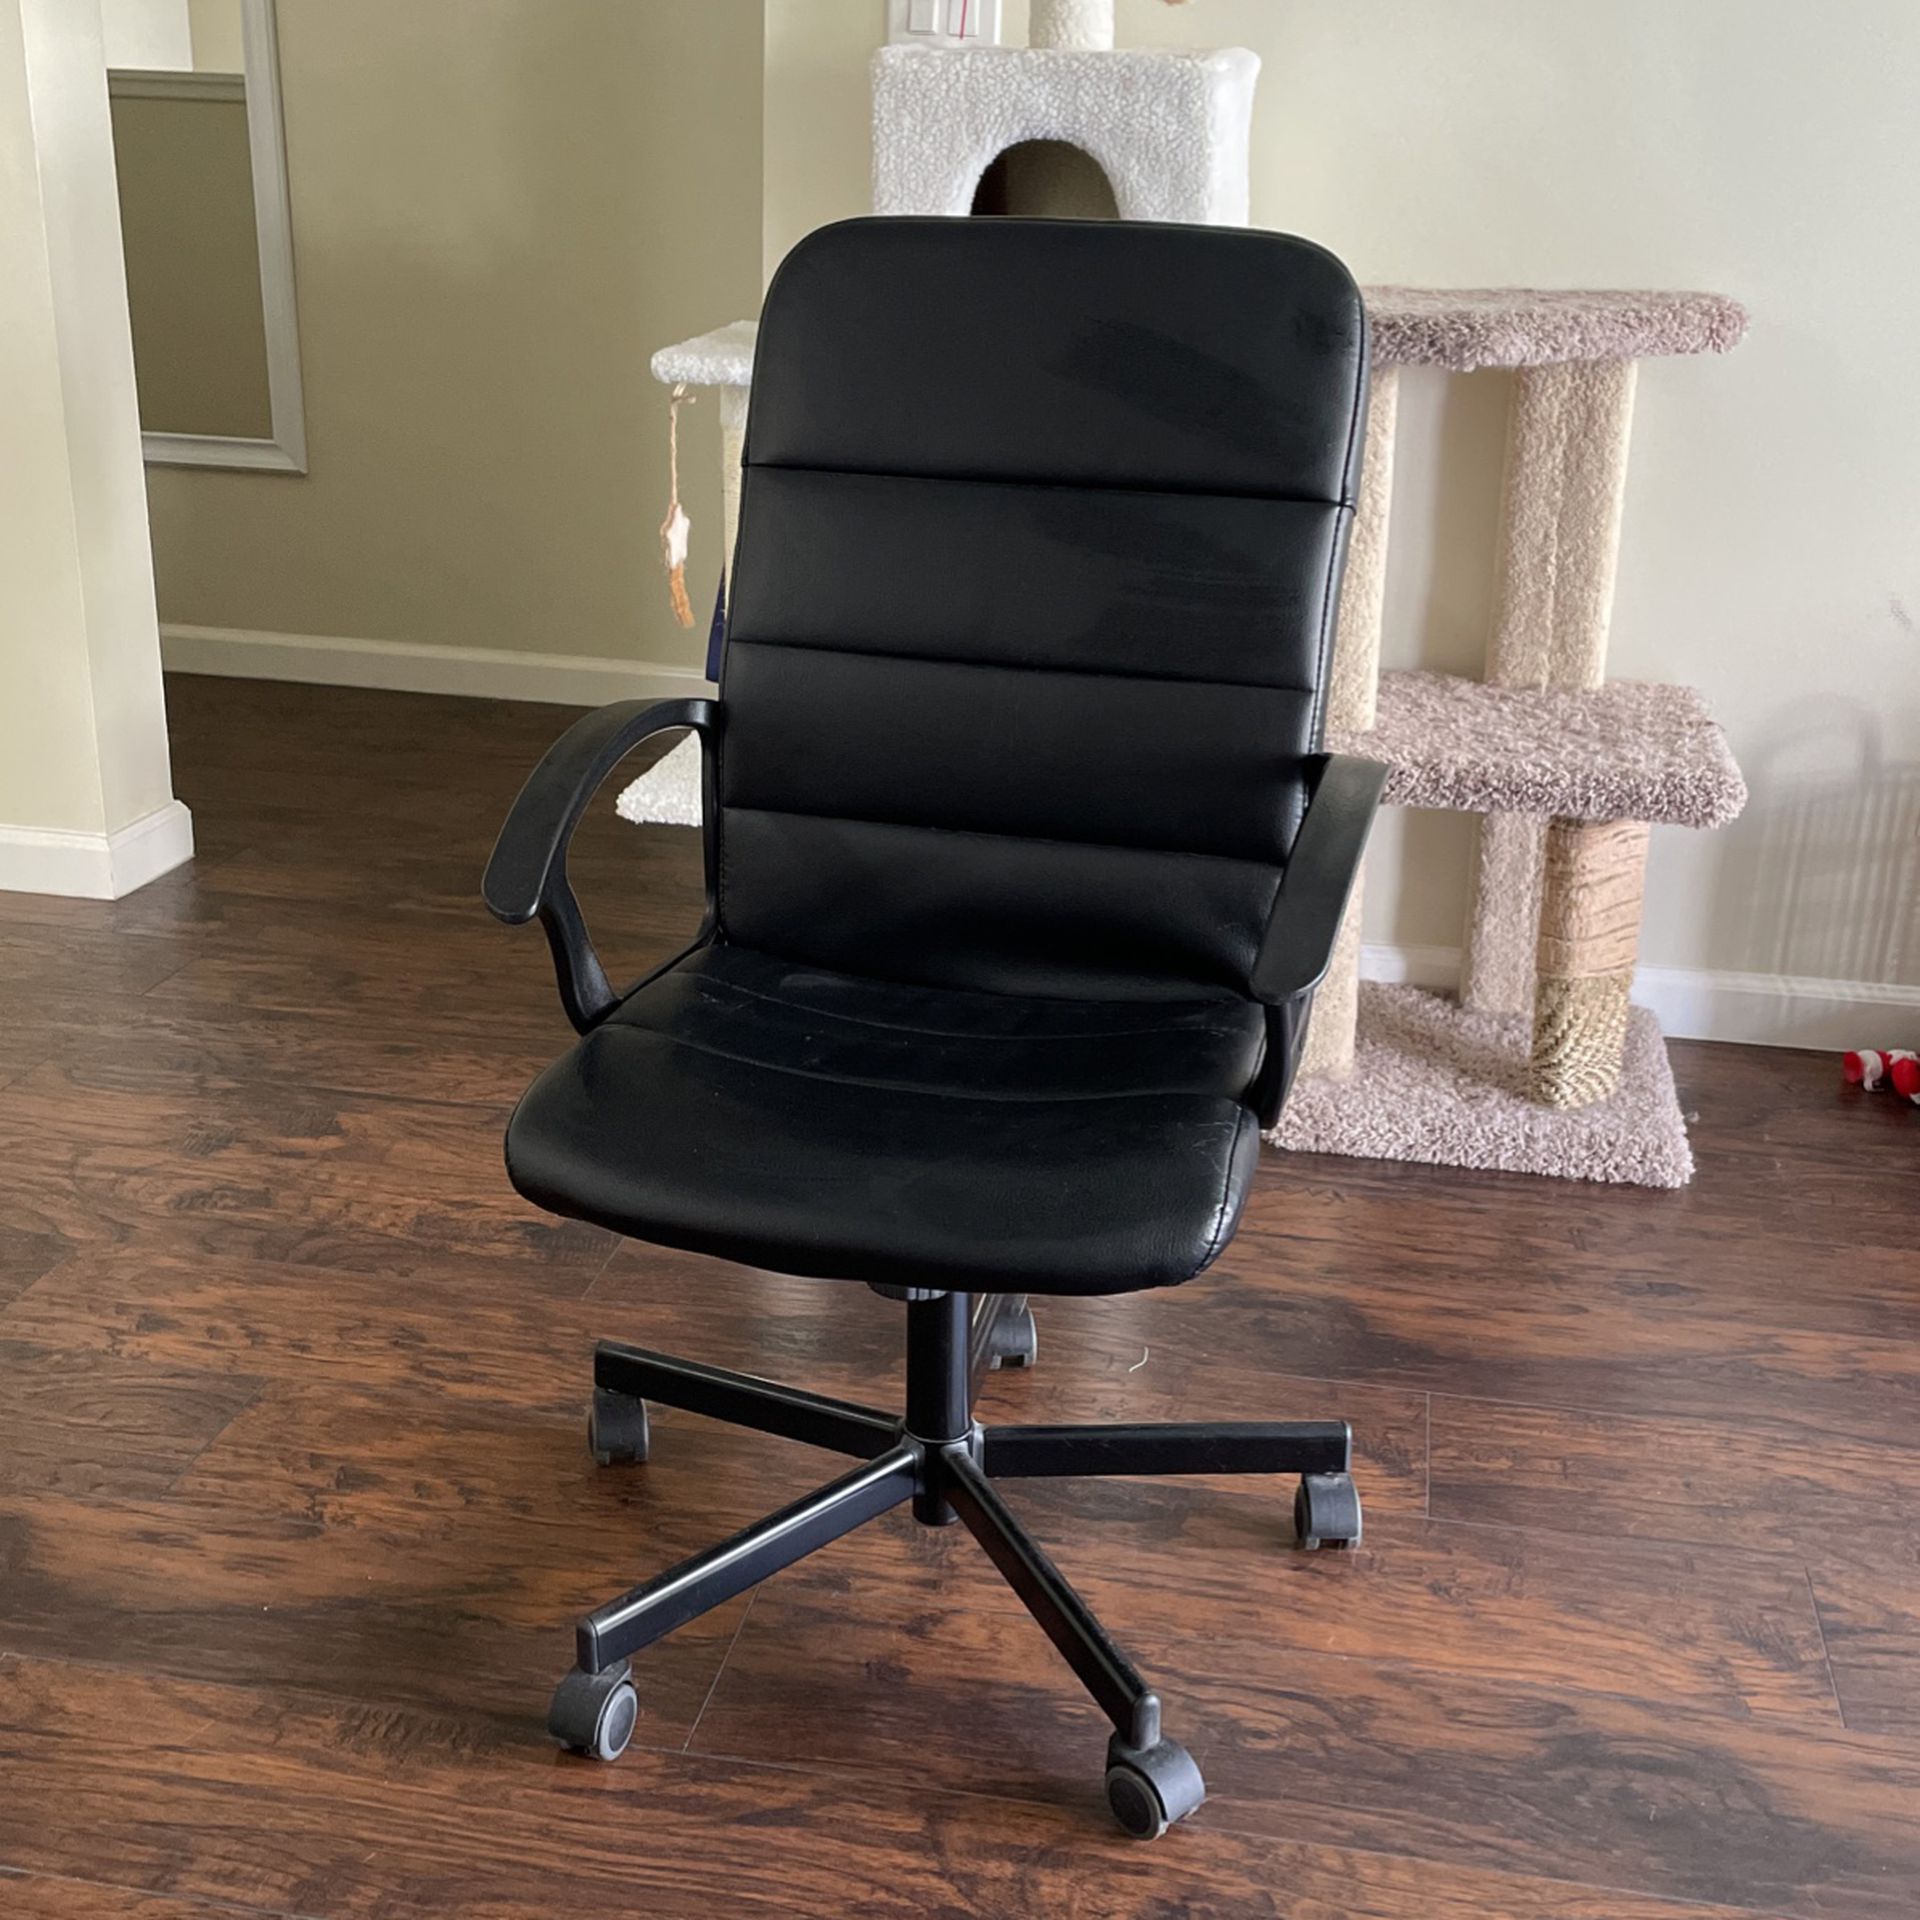 Game Chair PU Leather Black Office Chair